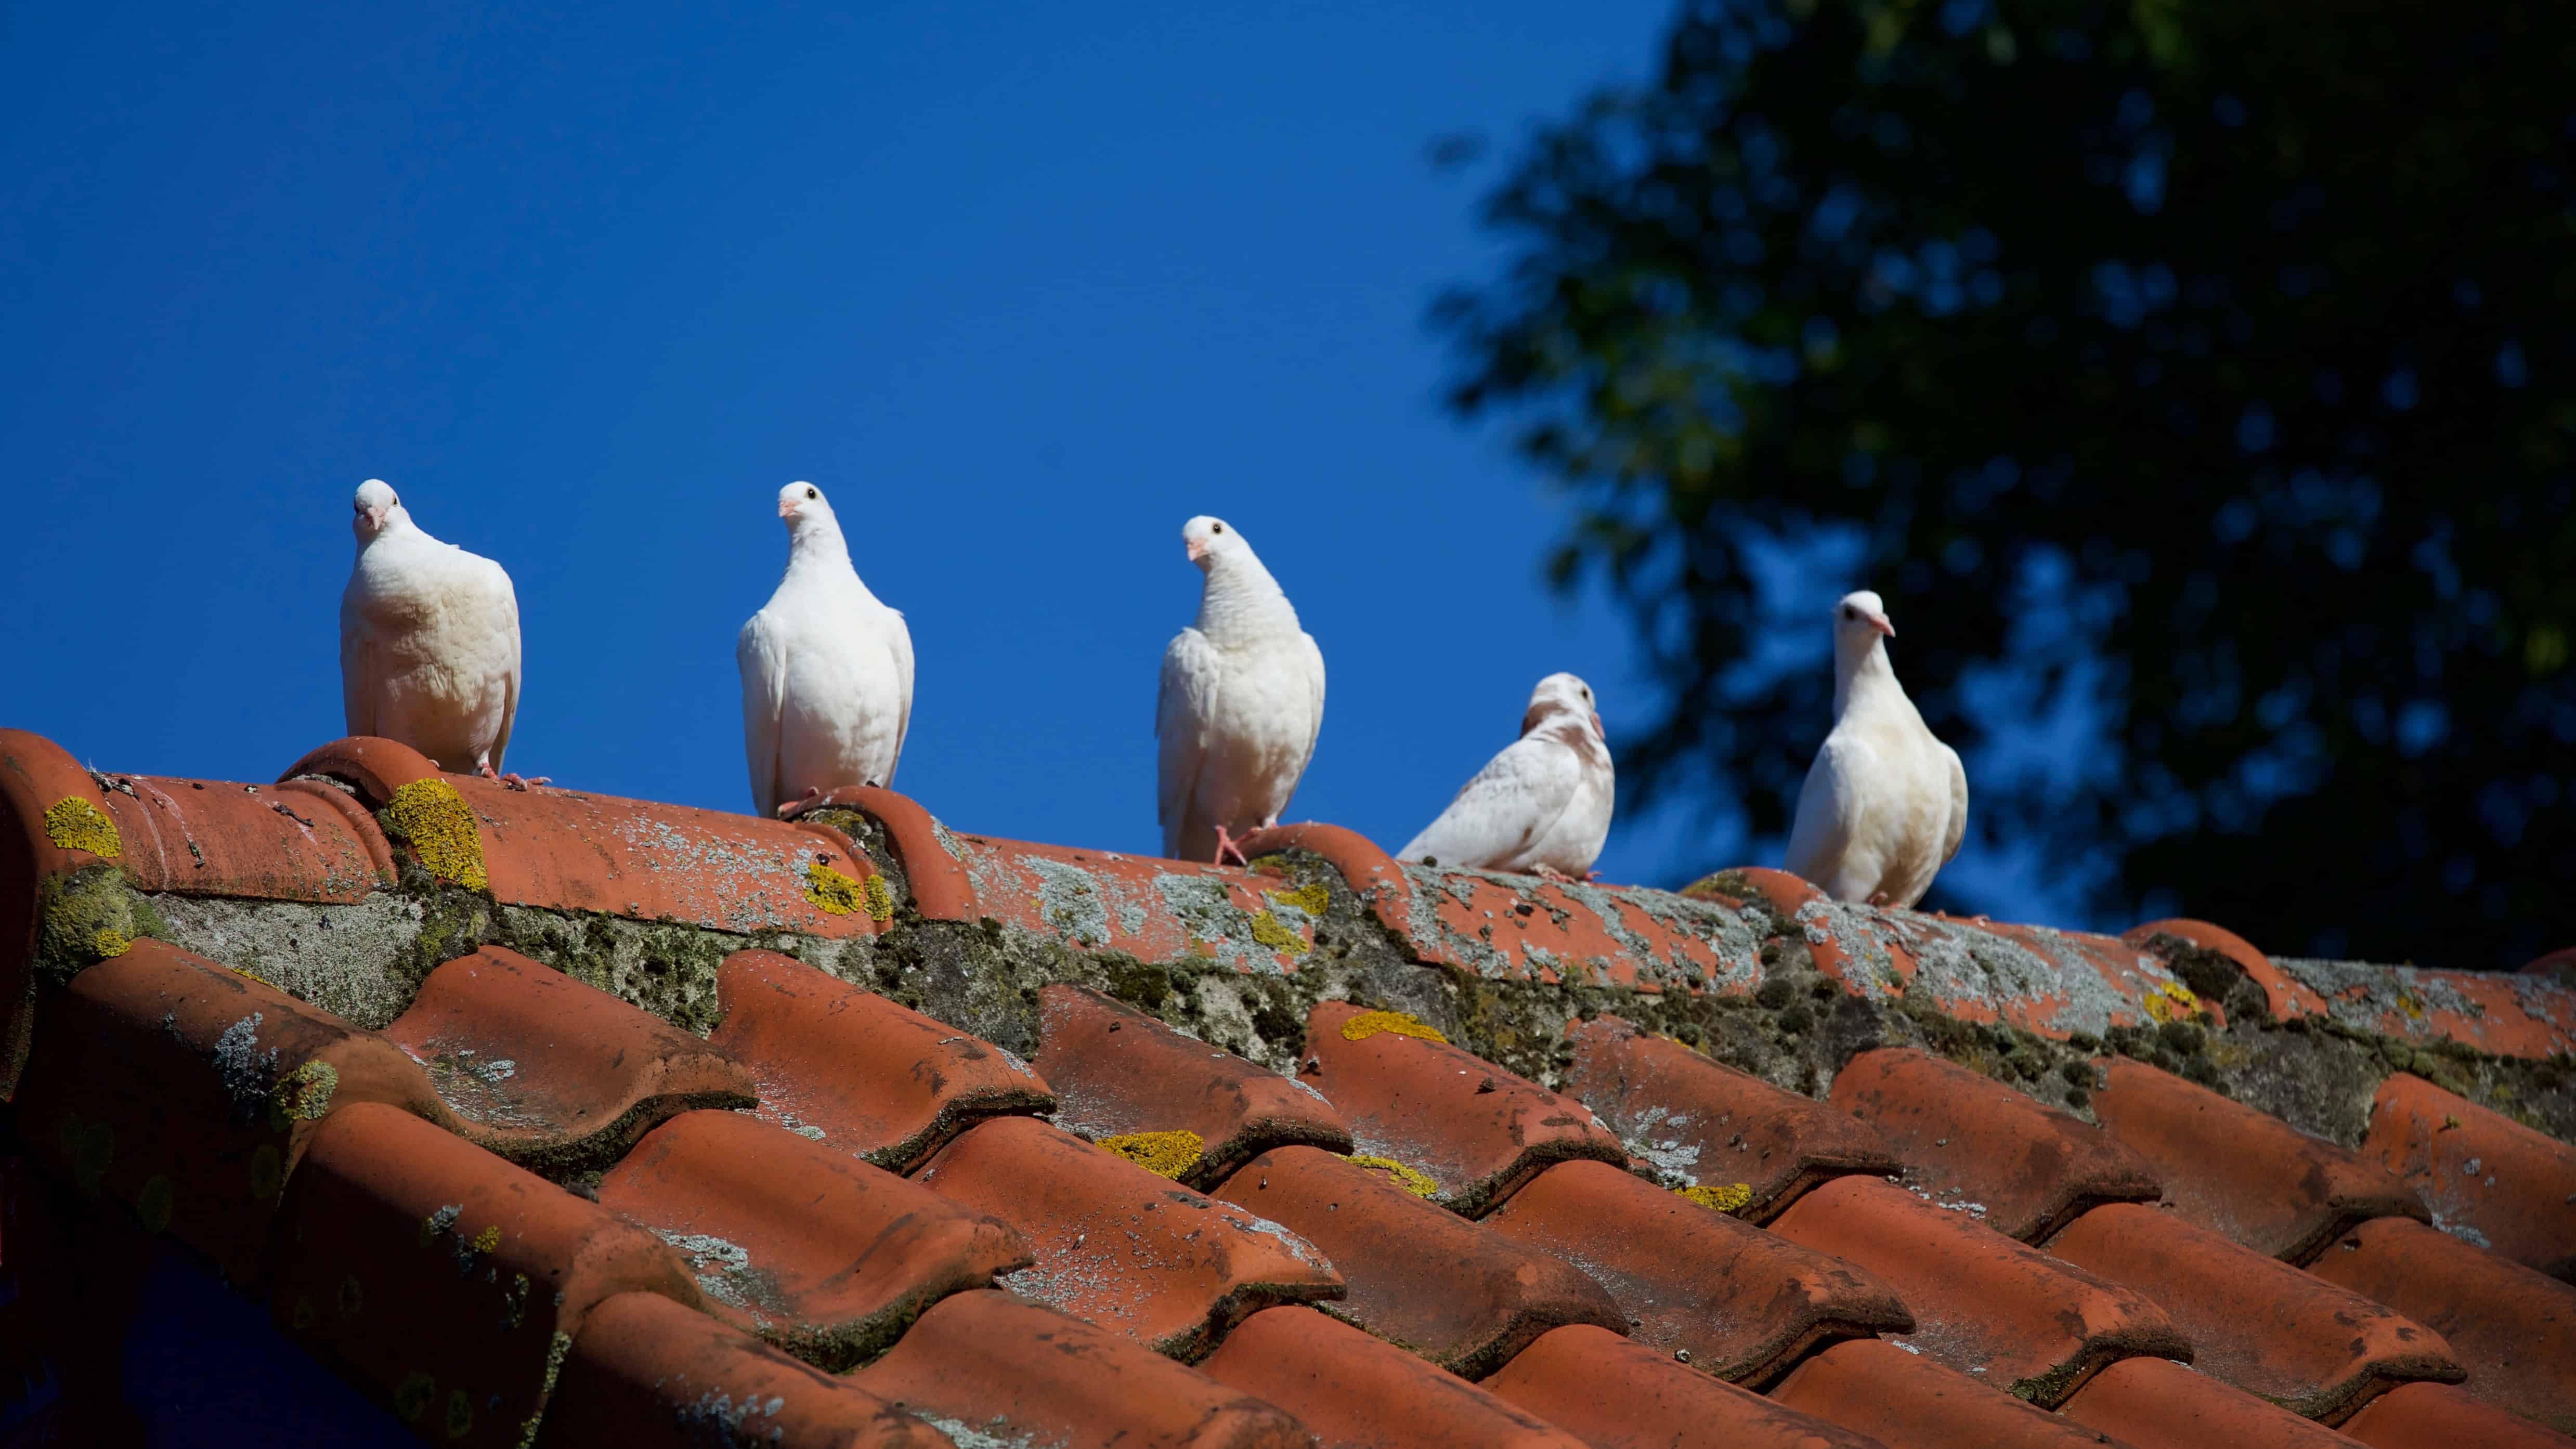 doves on an old, mossy roof